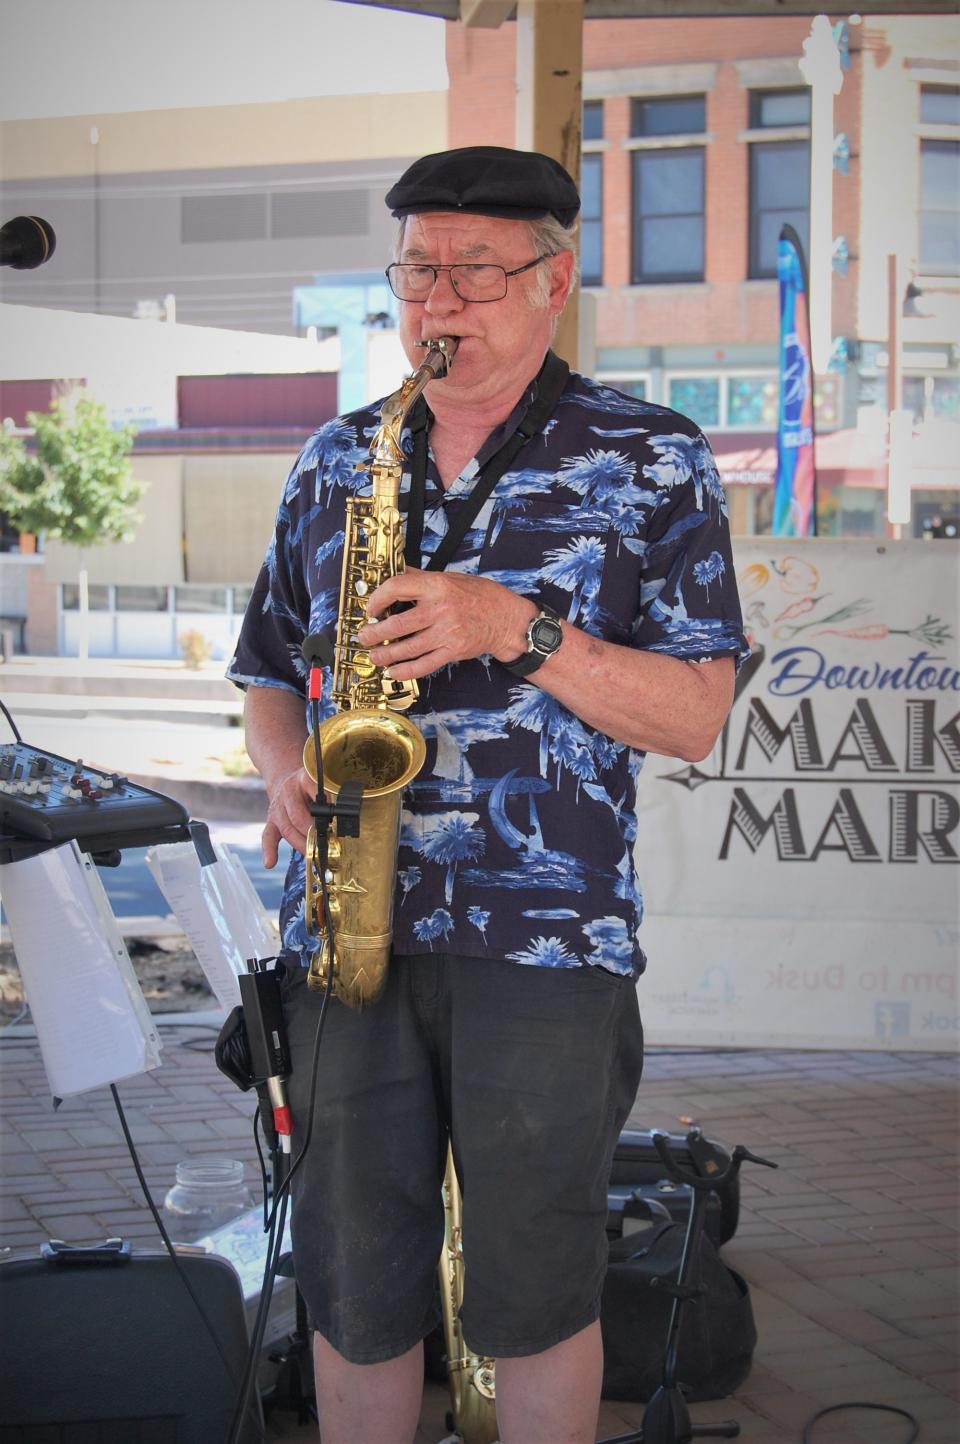 Saxophonist Mark Smith performs at Orchard Plaza during the Makers Market on June 2 in downtown Farmington.